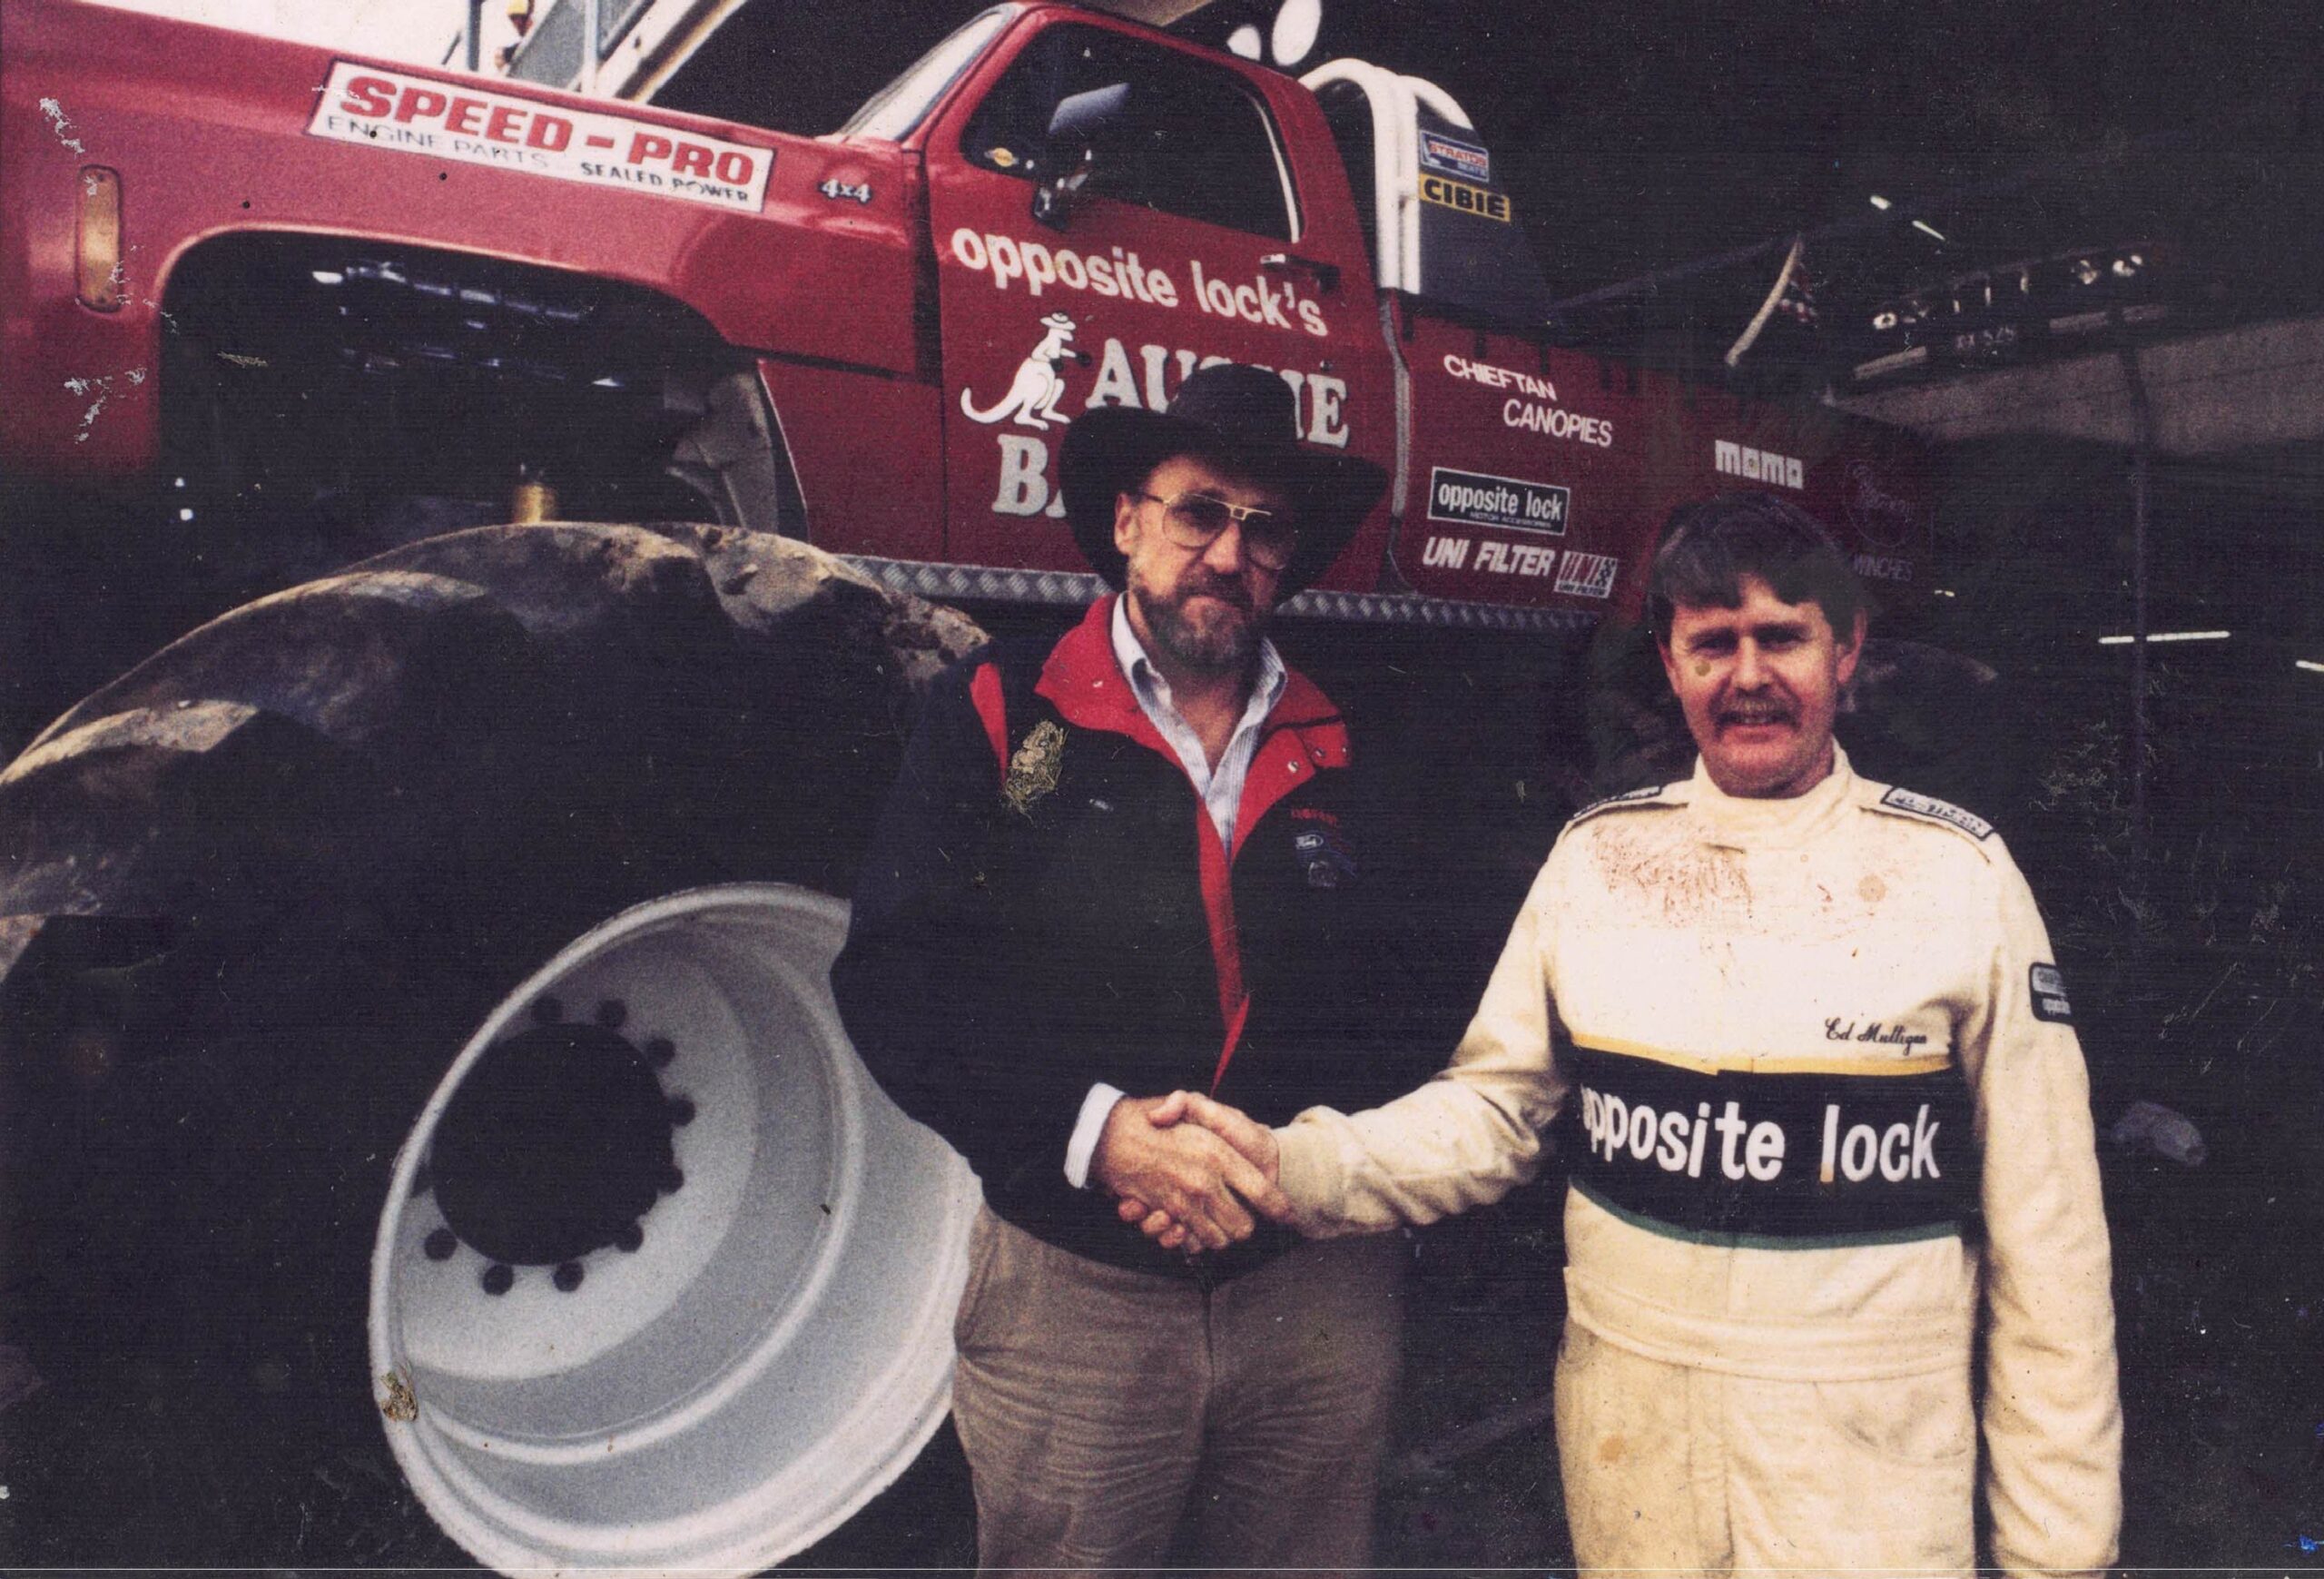 Ed with USA Bob - owner of Big Foot Monster Truck 1989